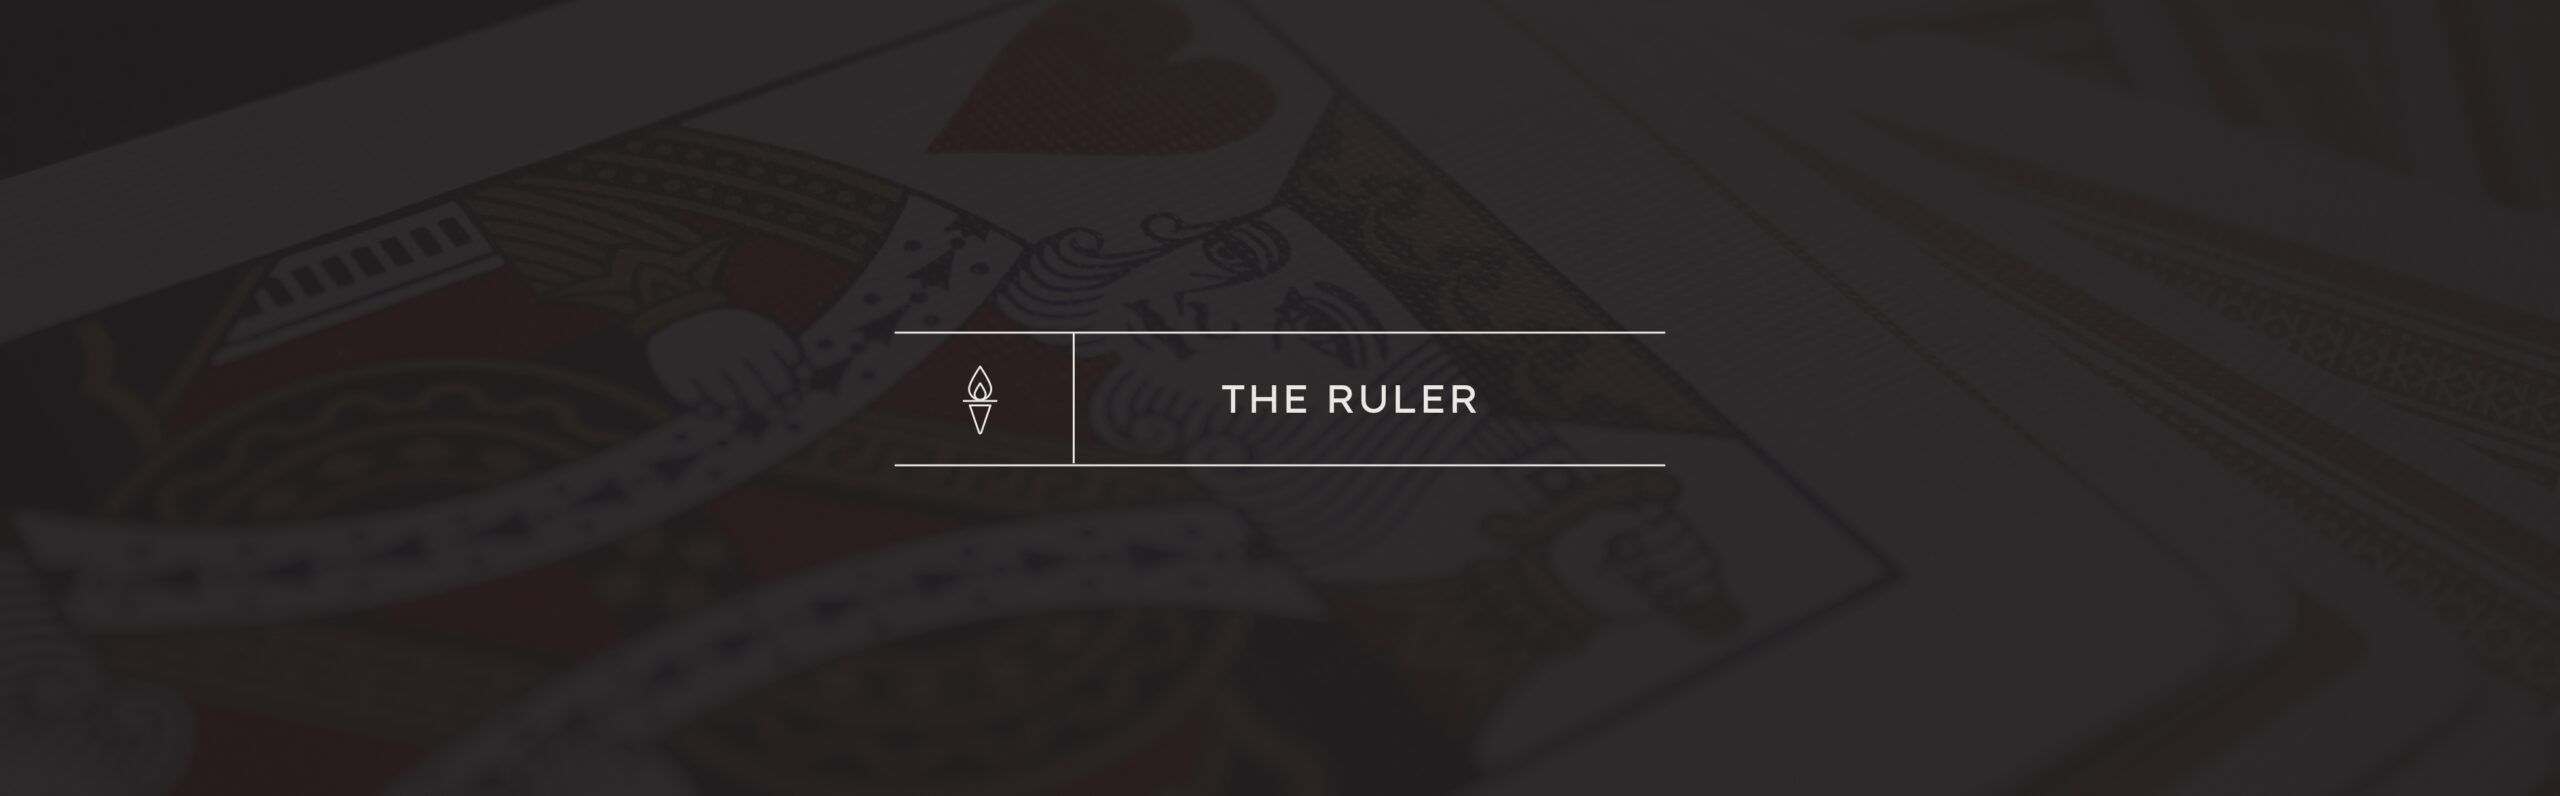 Brand Archetypes: The Ruler